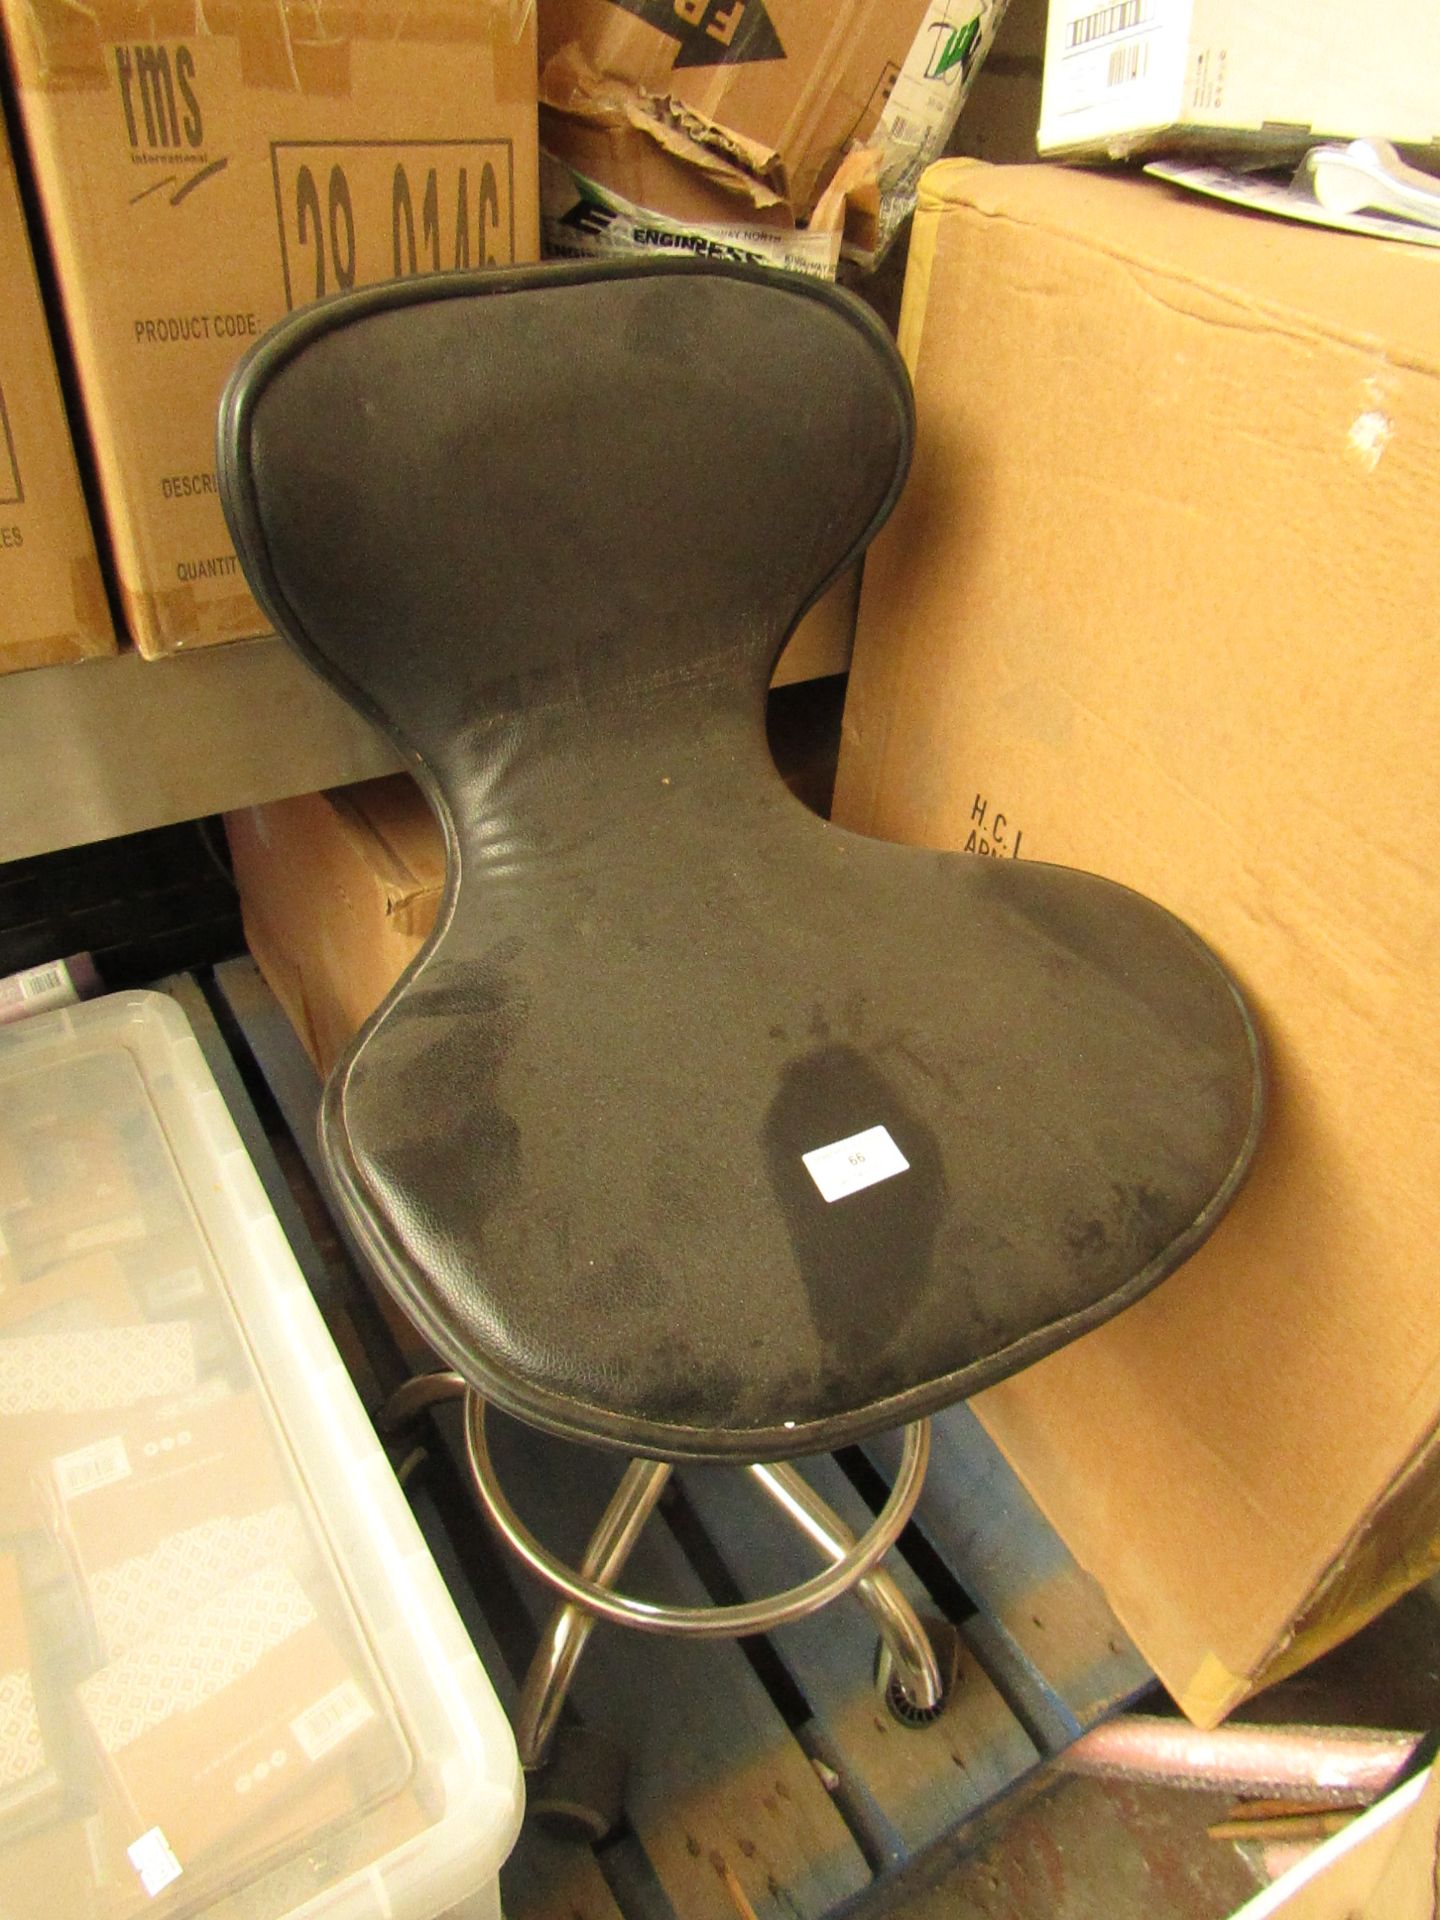 Black colour work stool with backrest. Item has been previously used.